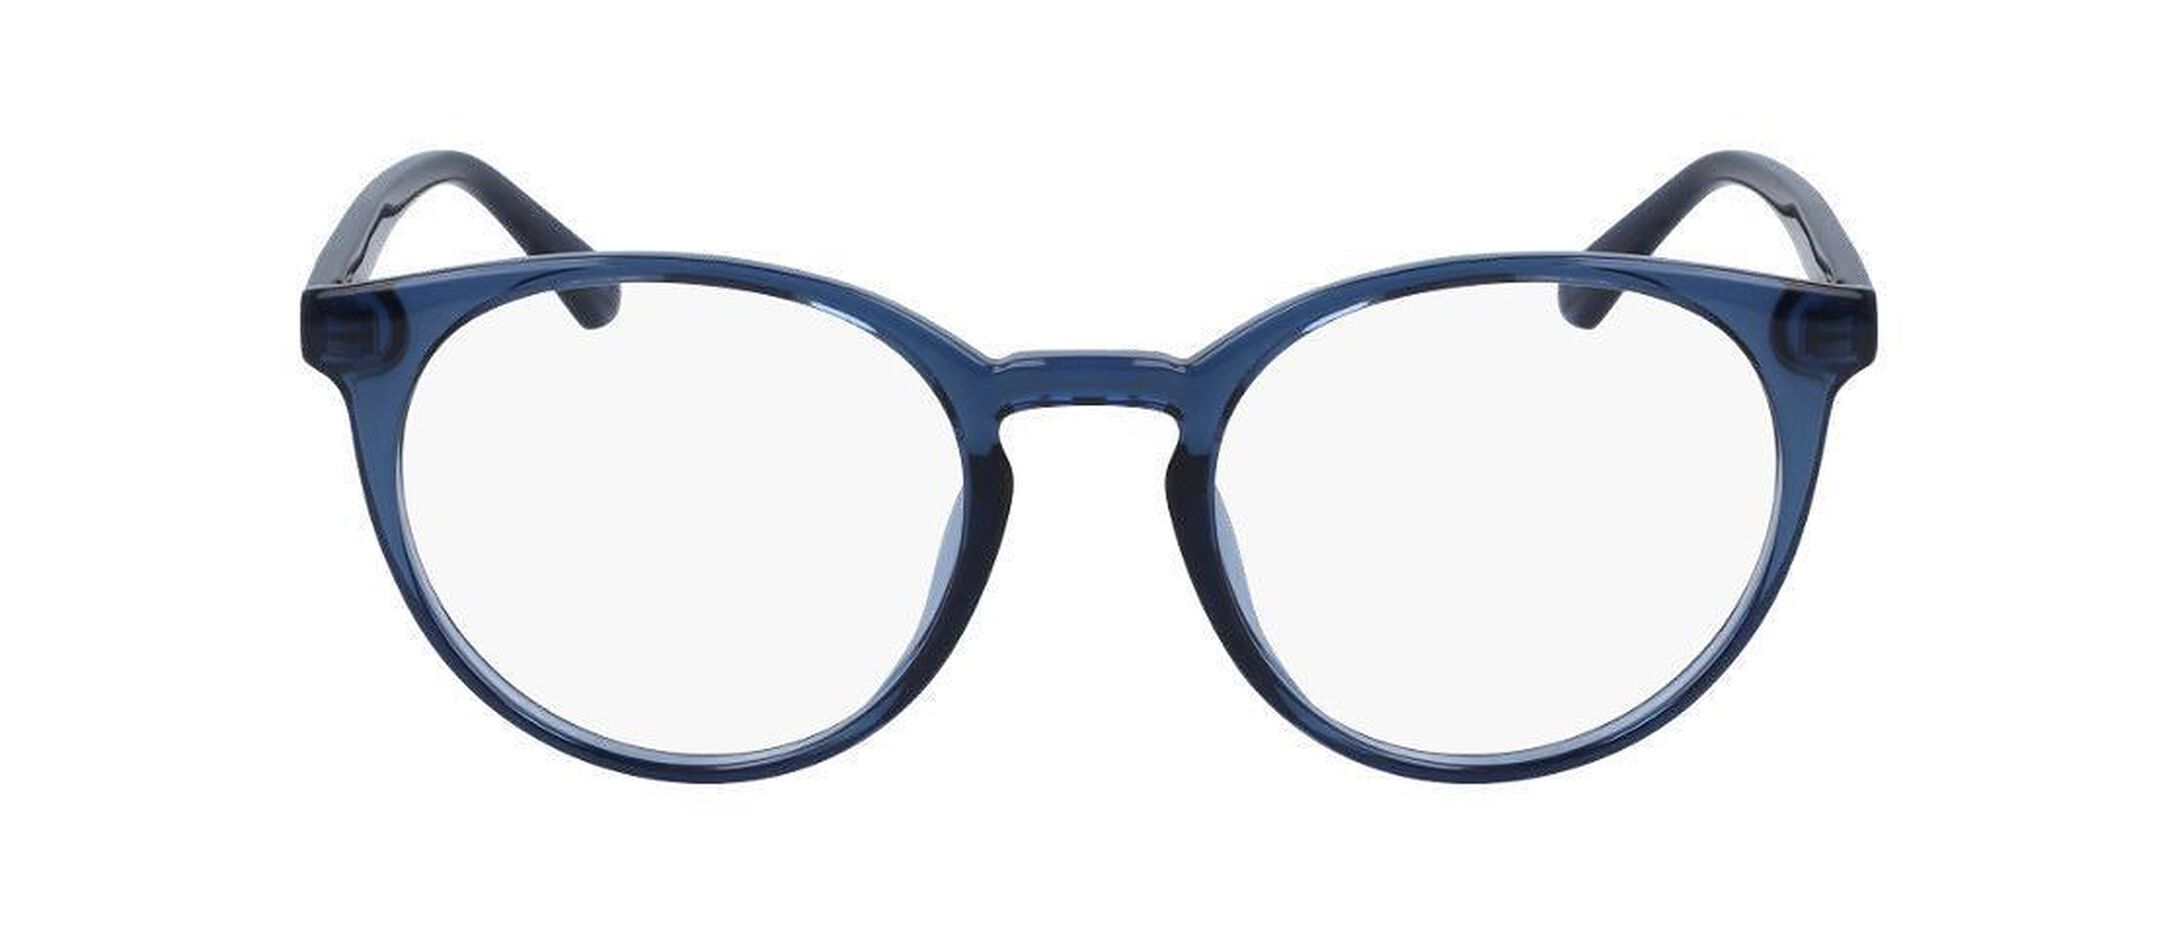 Calvin Klein CK20527 Glasses | Free Shipping and Returns | Eyeconic